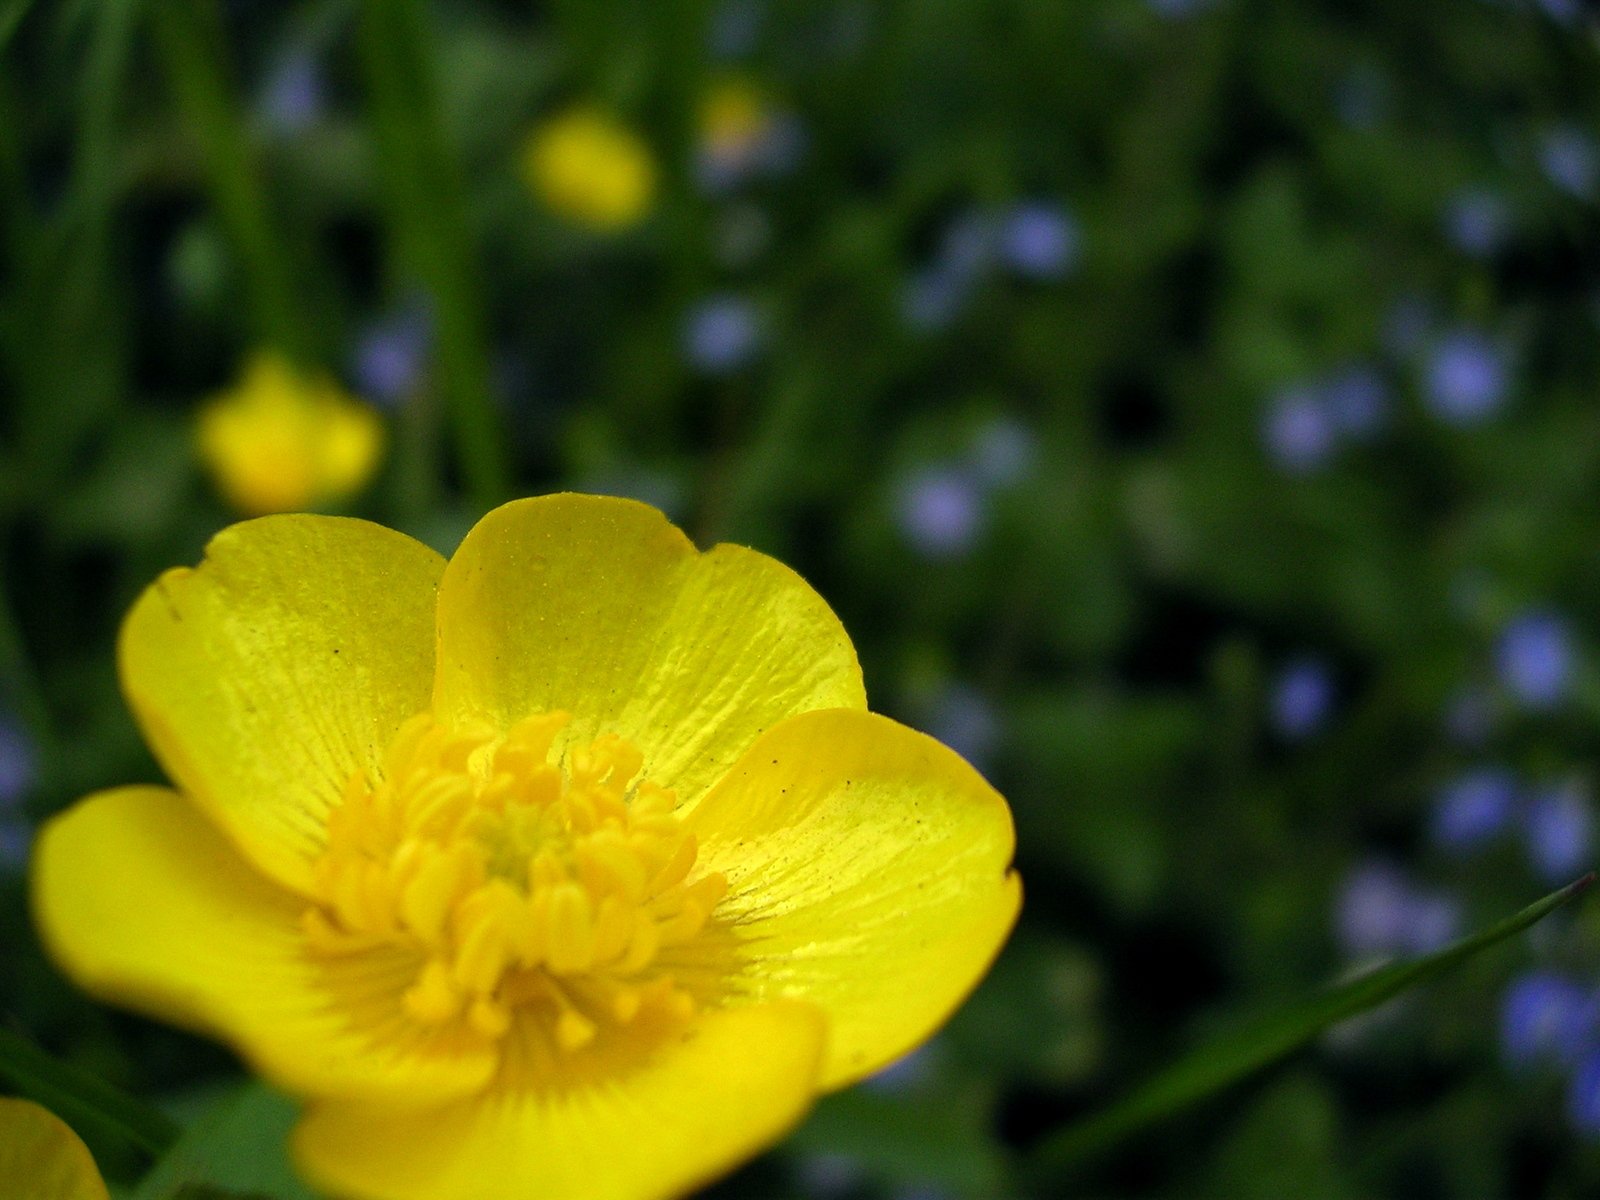 yellow flower in foreground with other flowers and grass